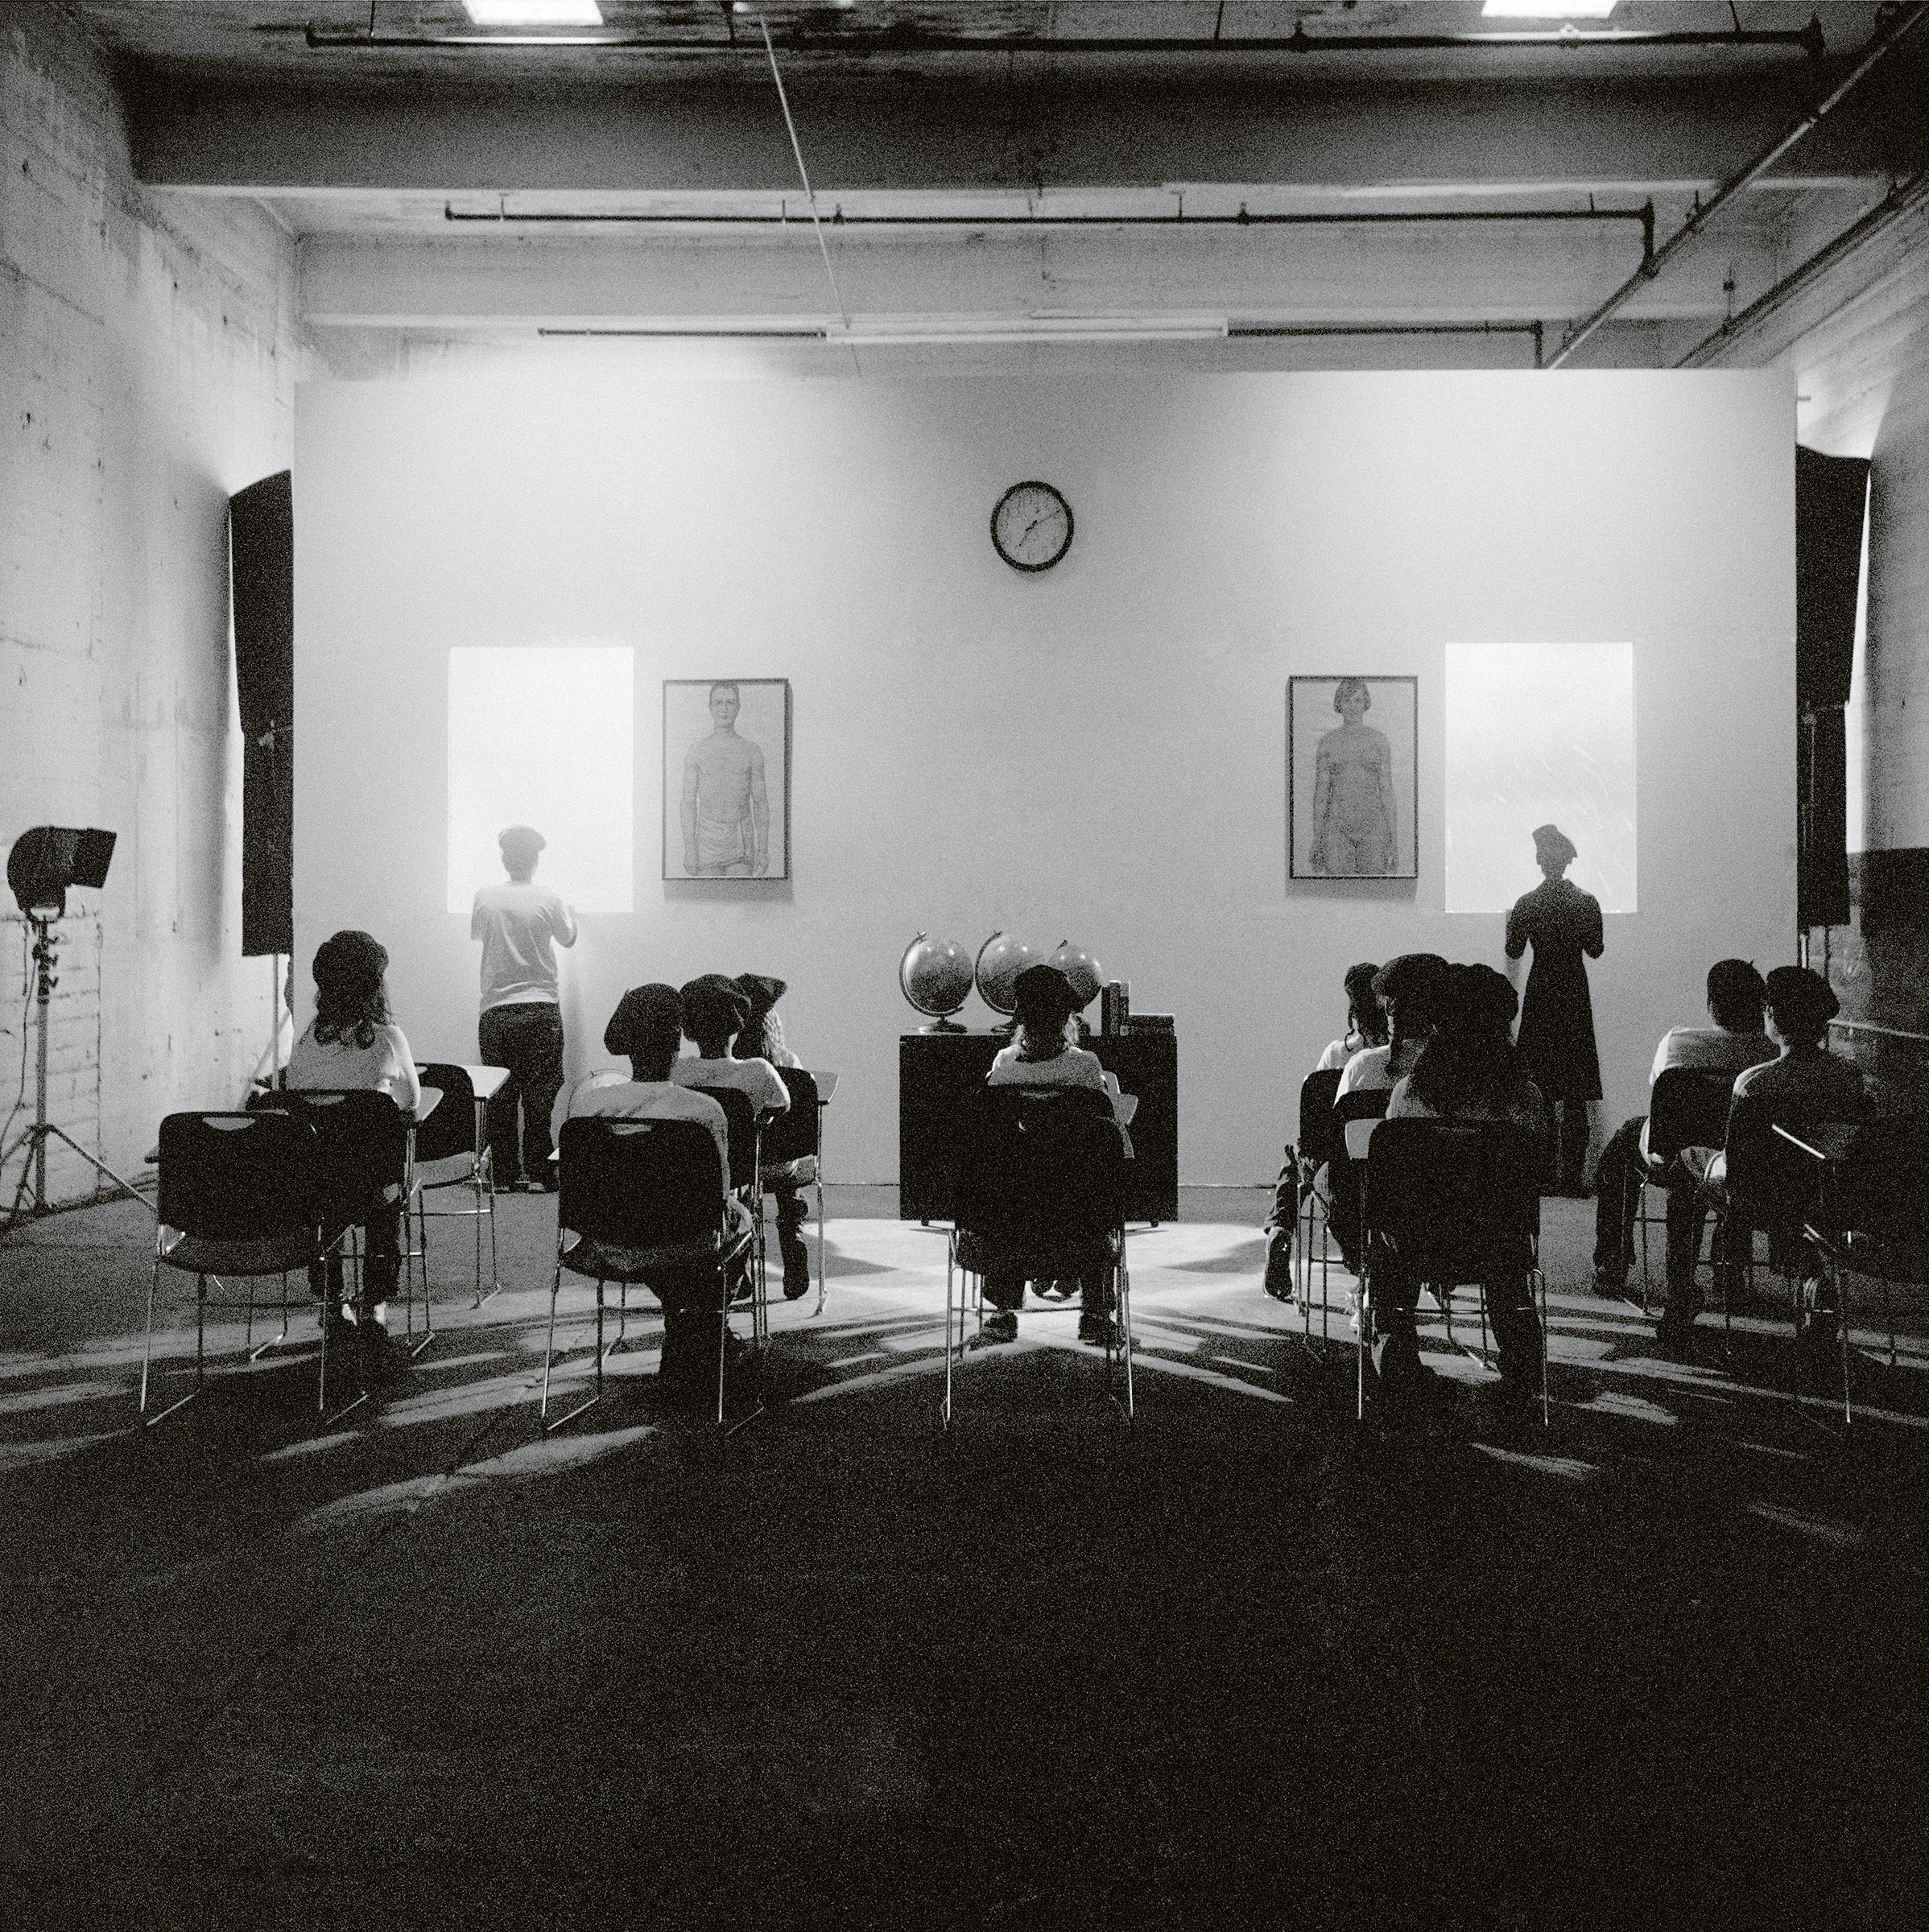 Carrie Mae Weem's A Class Ponders the Future, from the series Constructing History, 2008.